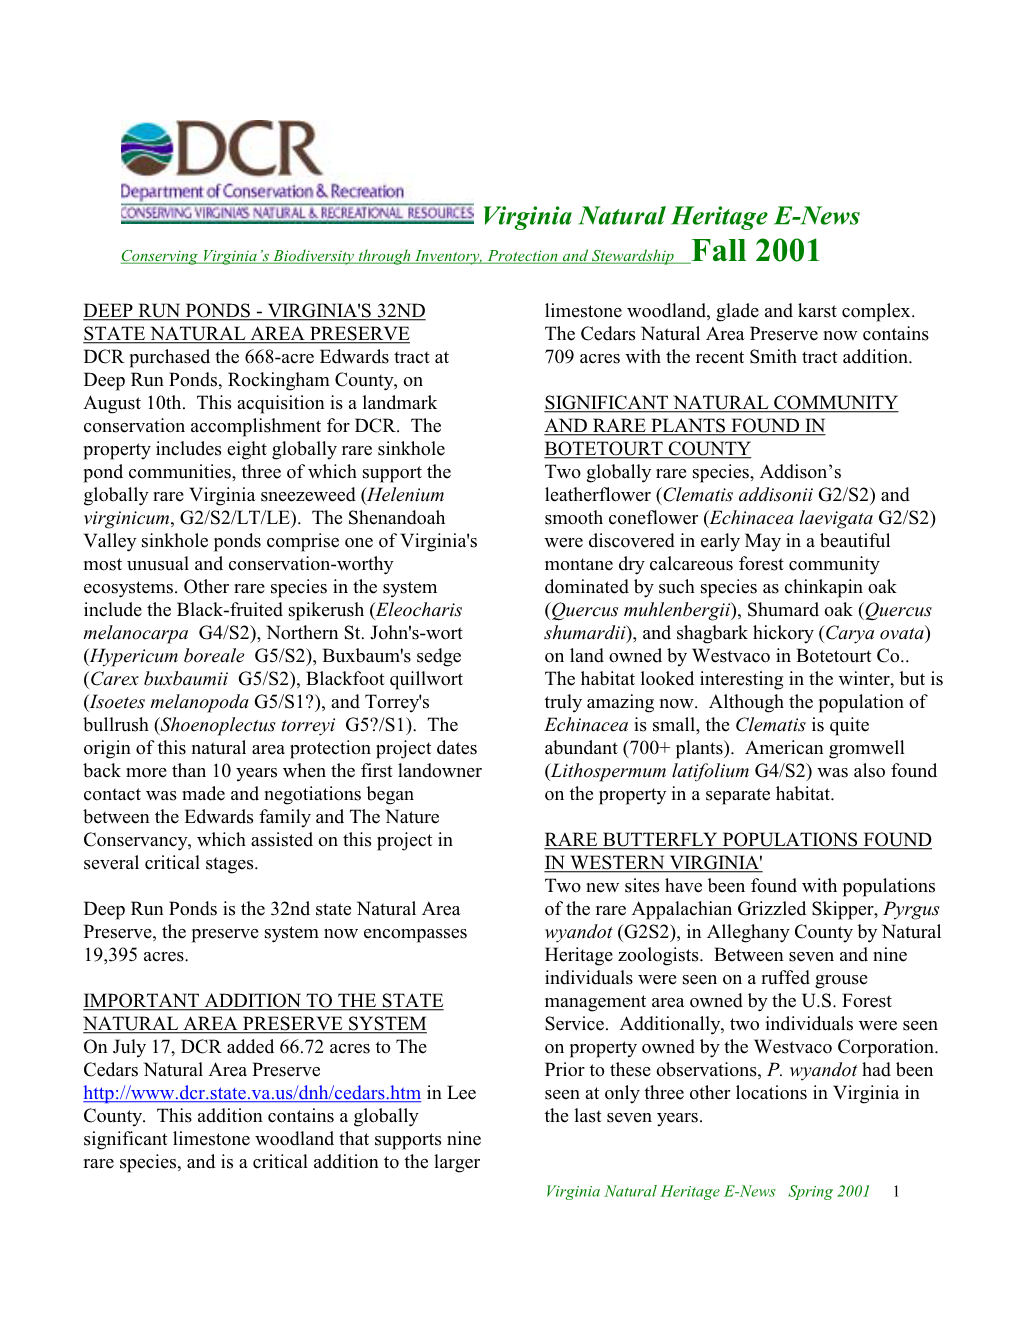 Virginia Natural Heritage E-News Conserving Virginia’S Biodiversity Through Inventory, Protection and Stewardship Fall 2001